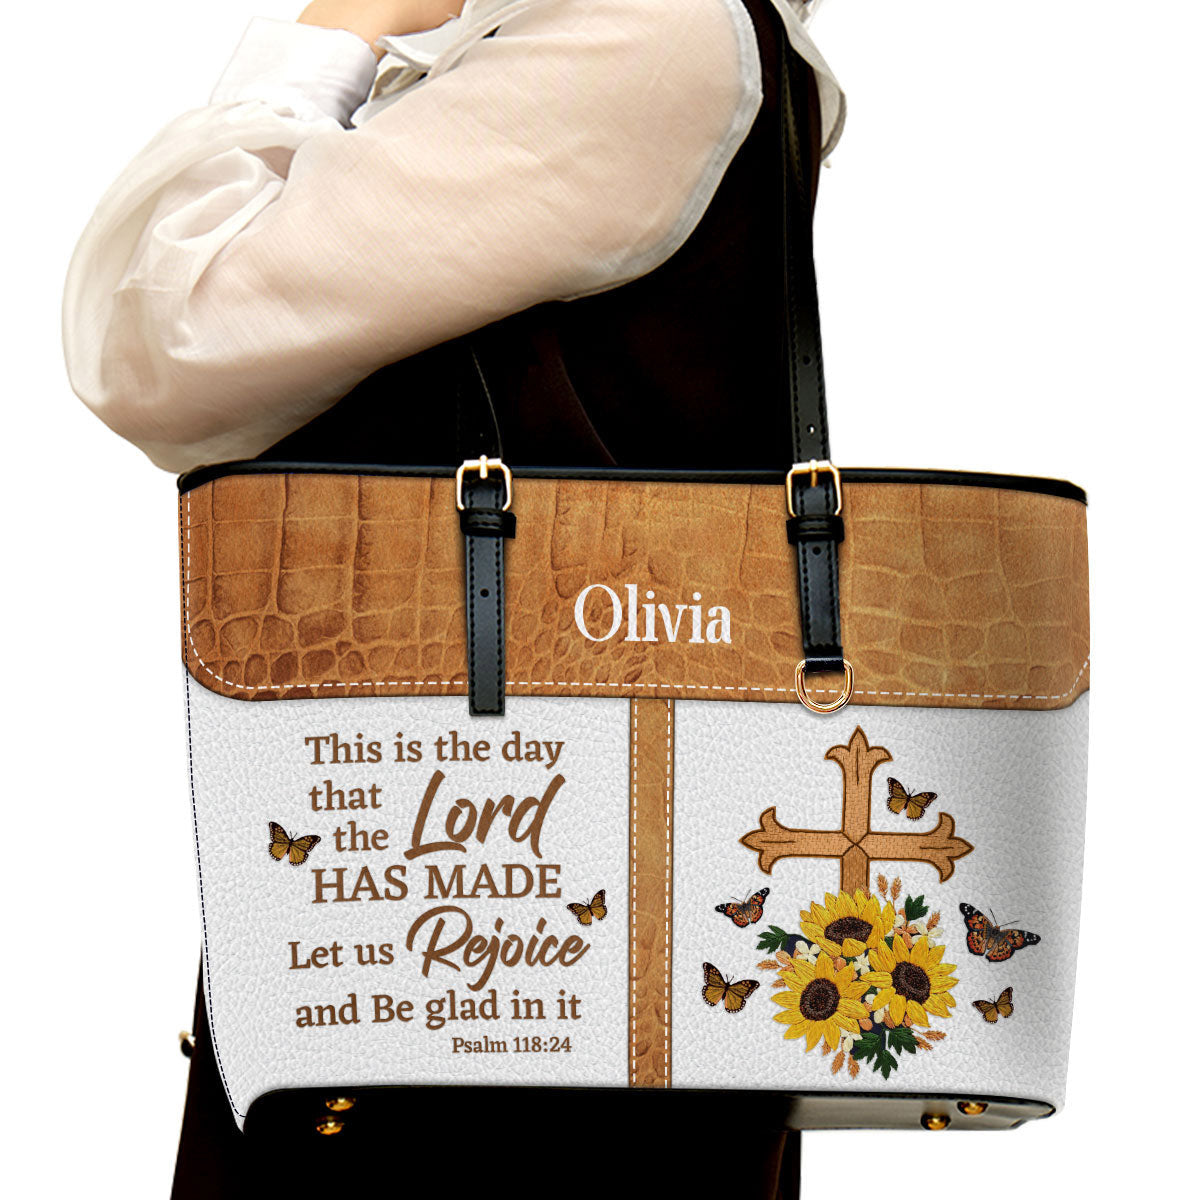 Let Us Rejoice And Be Glad In It Personalized Pu Leather Tote Bag For Women - Mom Gifts For Mothers Day